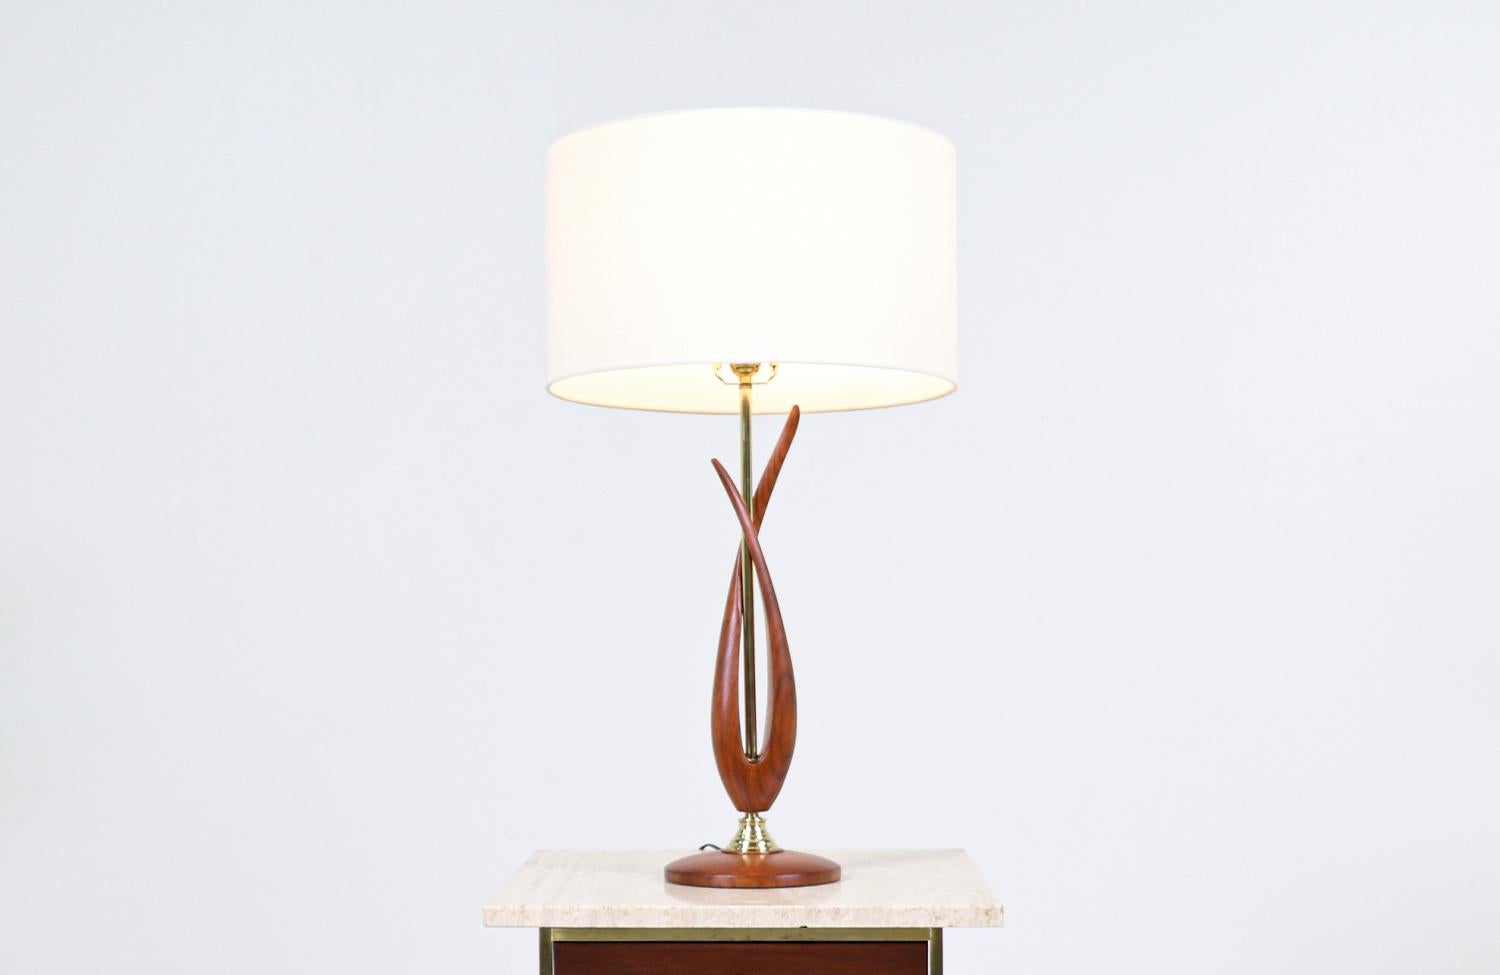 Dimensions:
32 in H x 7.50 in W x 7.50 in D

Lamp Shade:
10 in H x 17in W x 17in D.

______________________________________________________________

Transforming a piece of Mid-Century Modern furniture is like bringing history back to life, and we